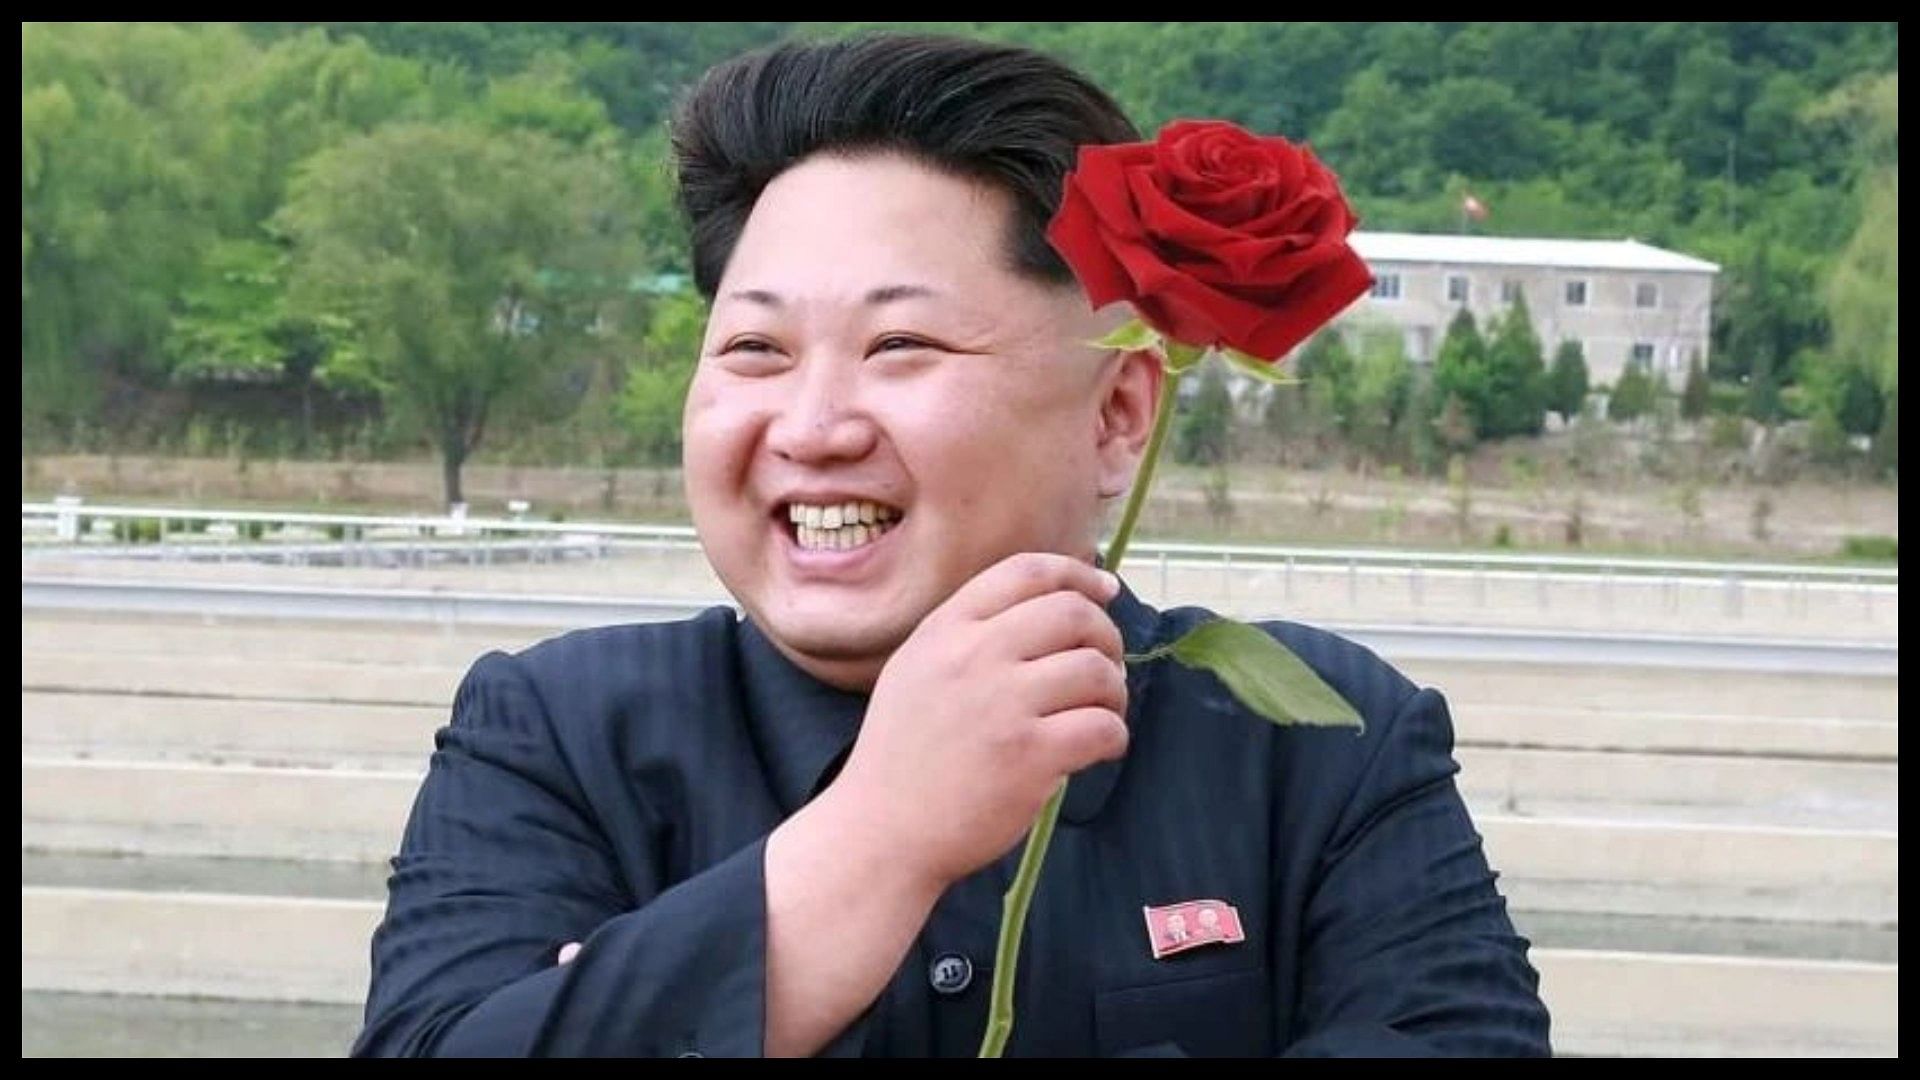 North Korean dictator Kim Jong every year 25 beautiful girls are selected by in his Pleasure Squad